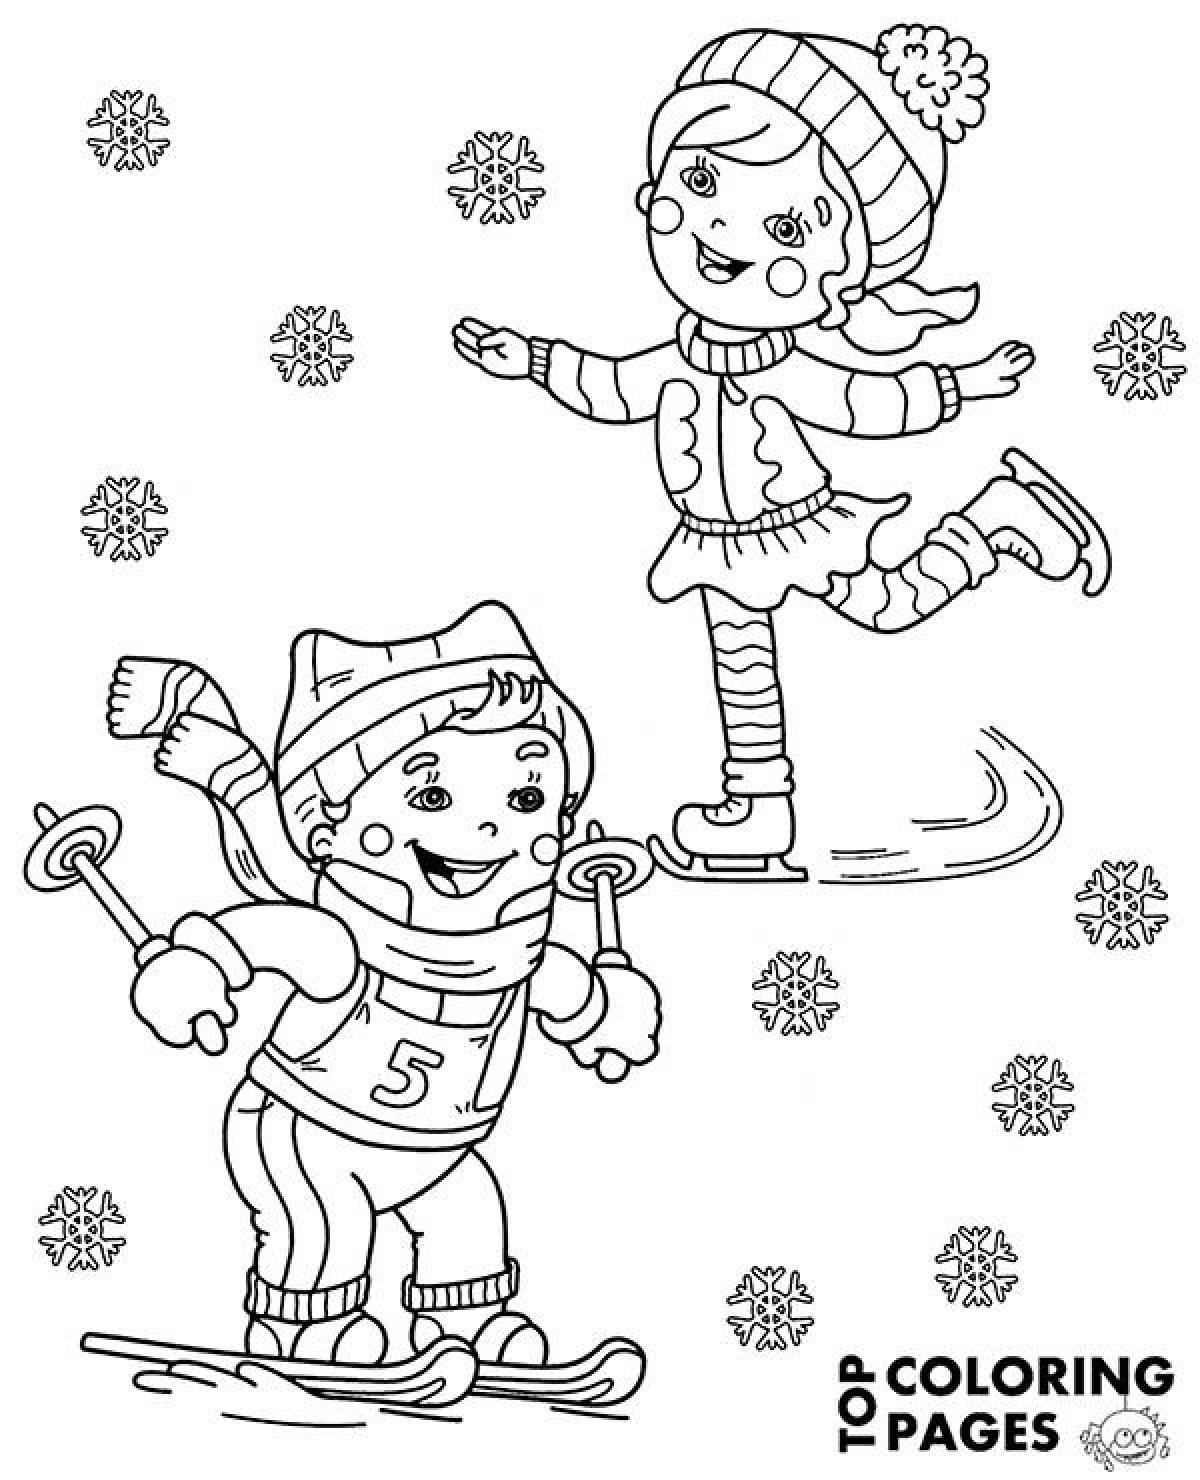 Spicy winter sports coloring pages for 6-7 year olds